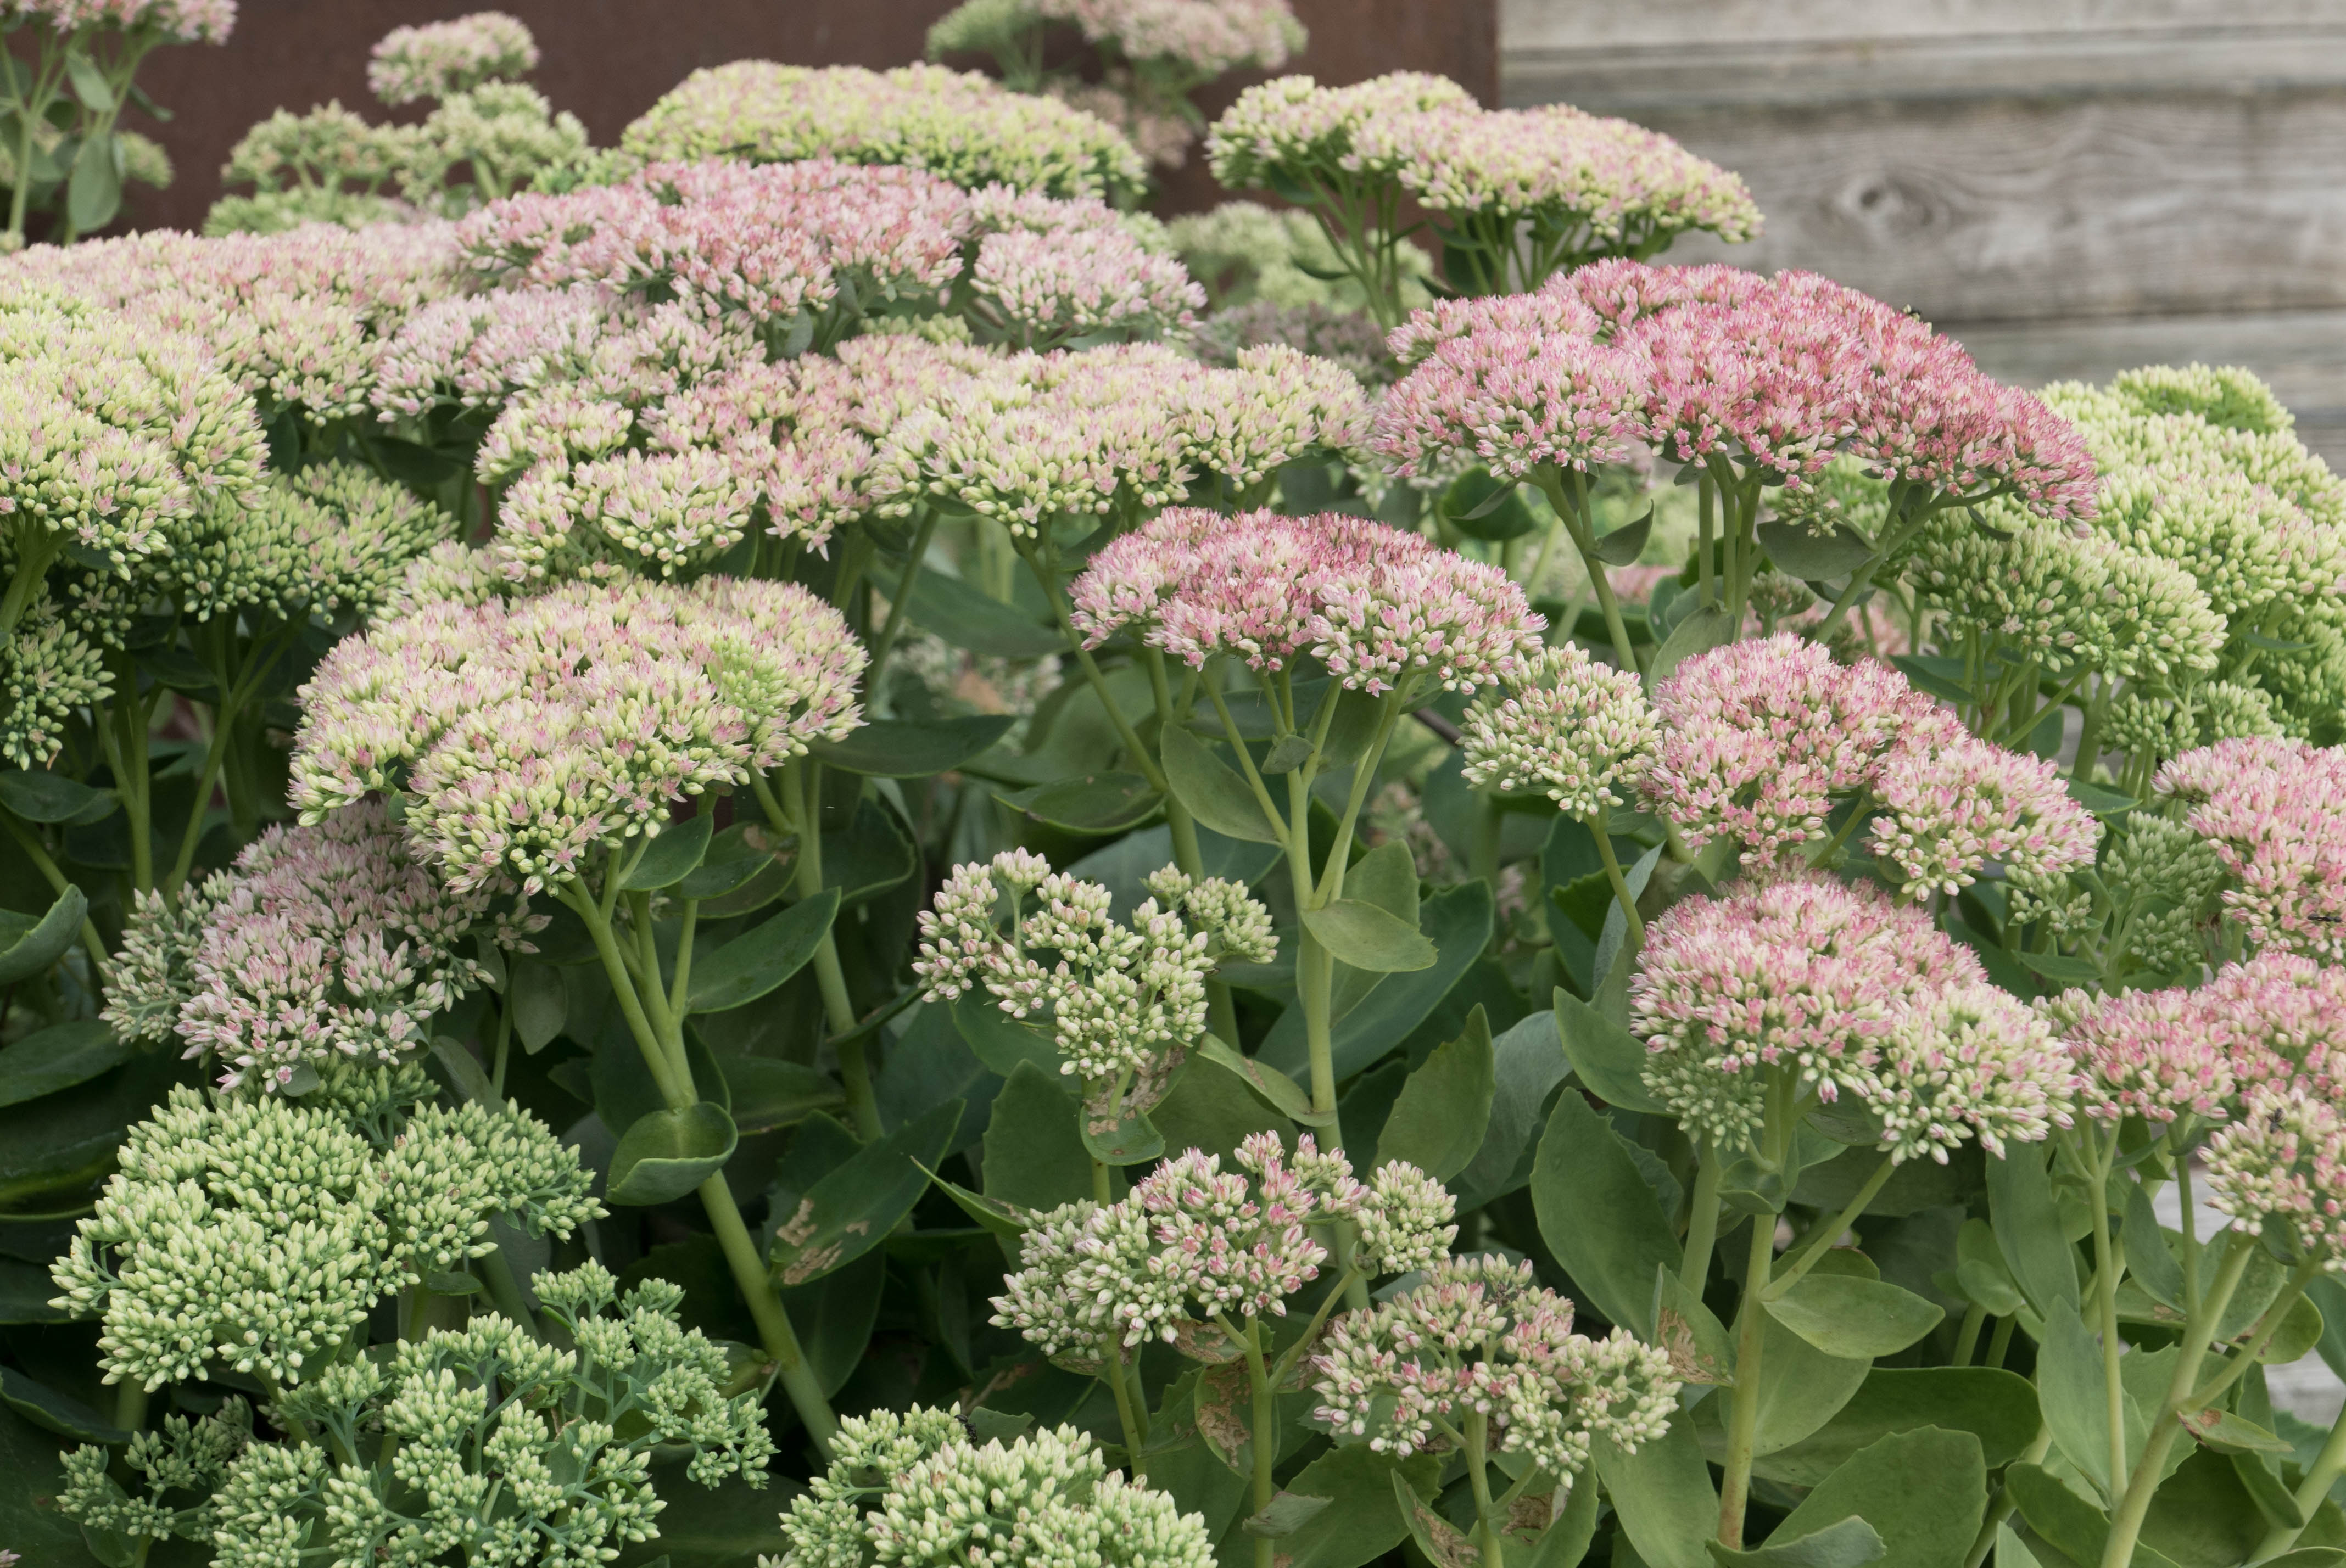 In full bloom, the sedum is covered with happy bees.